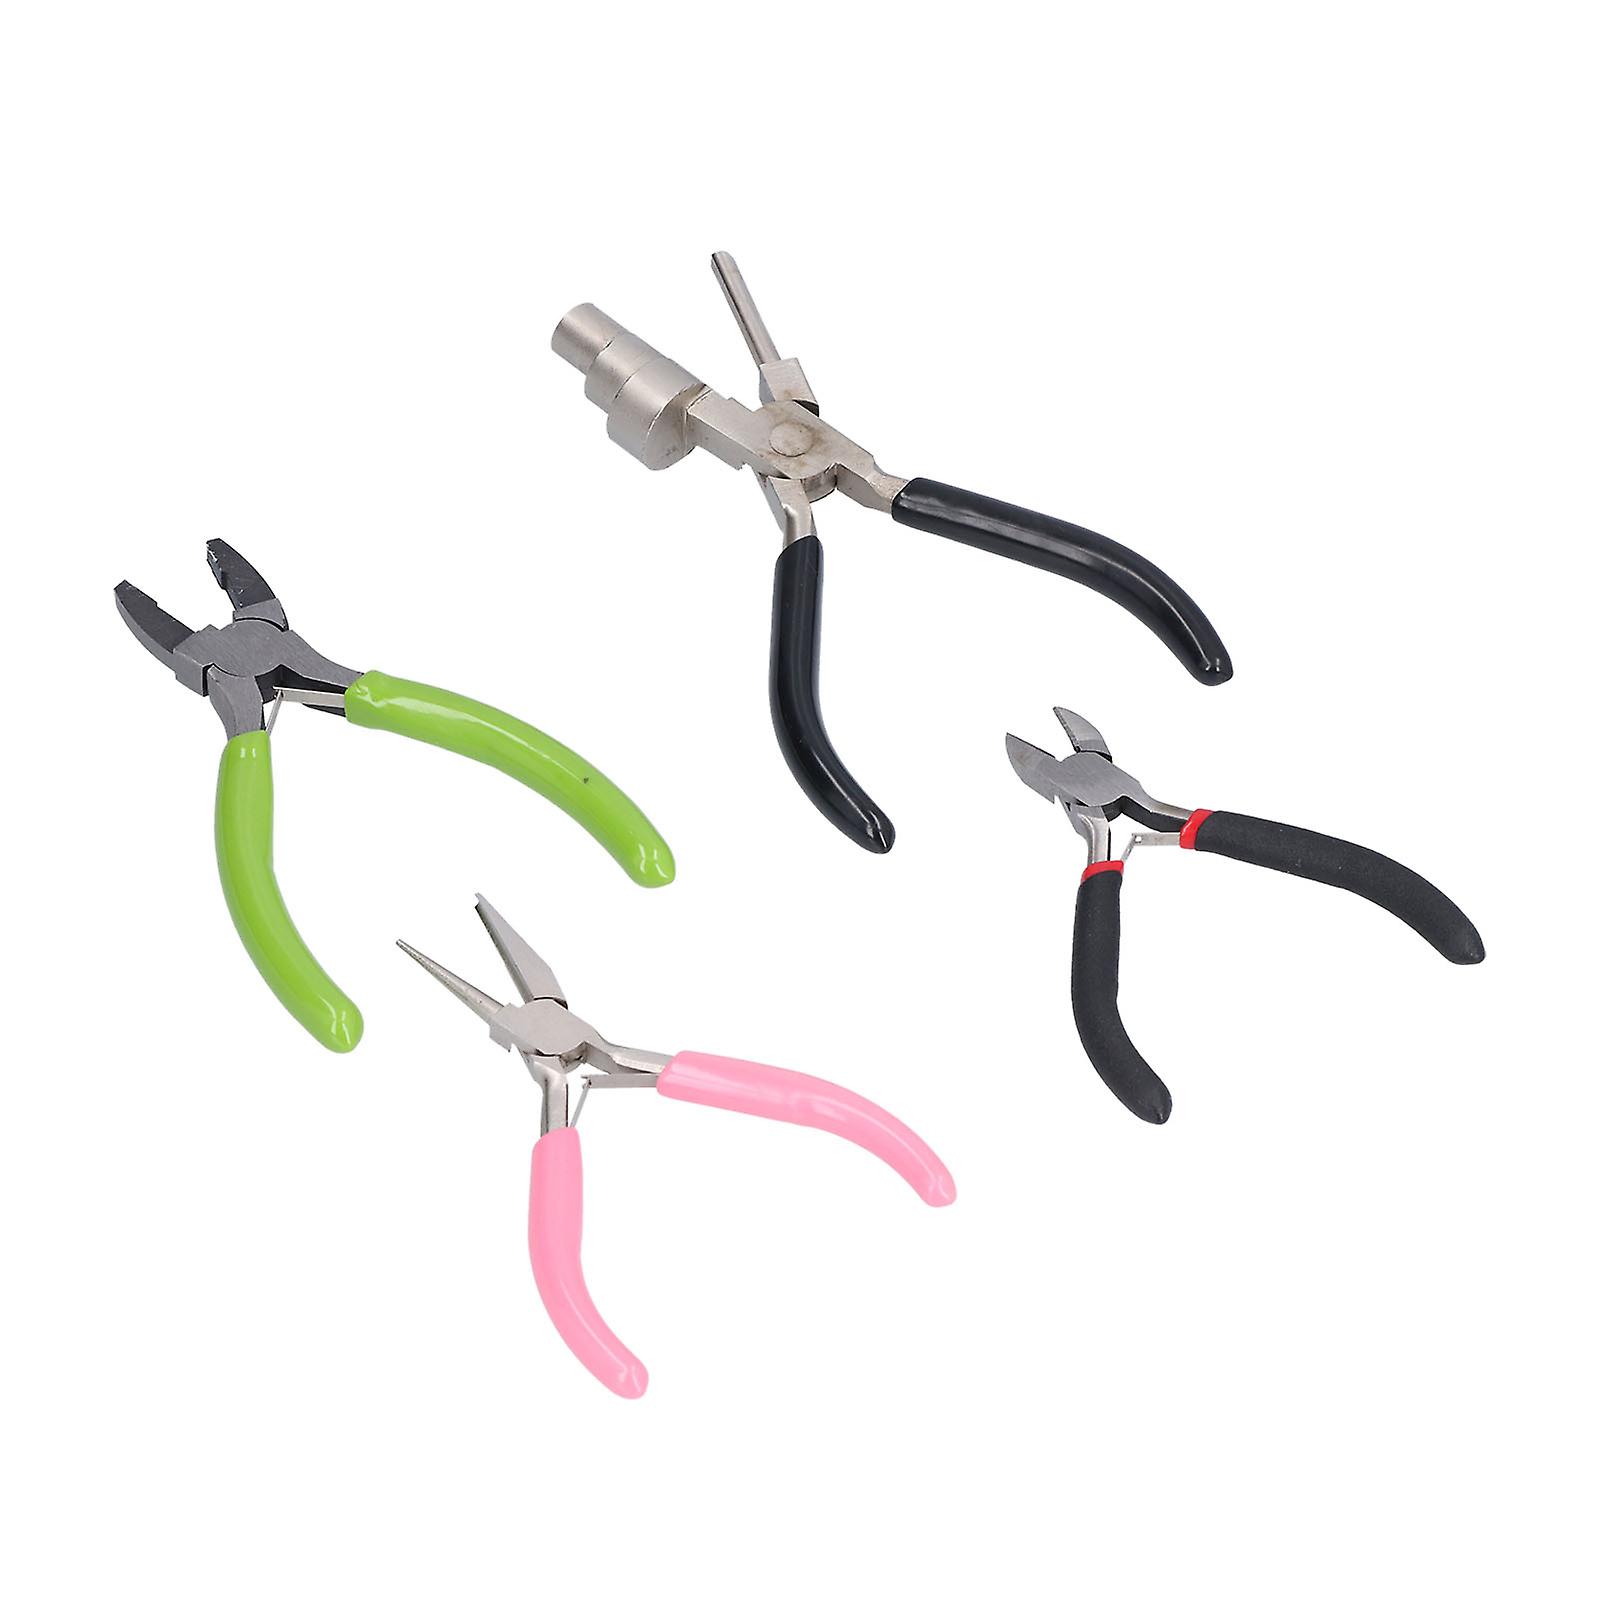 4pcs Jewelry Pliers High Carbon Steel Diagonal Bail Making Pliers Hand Crimping Winding Tools